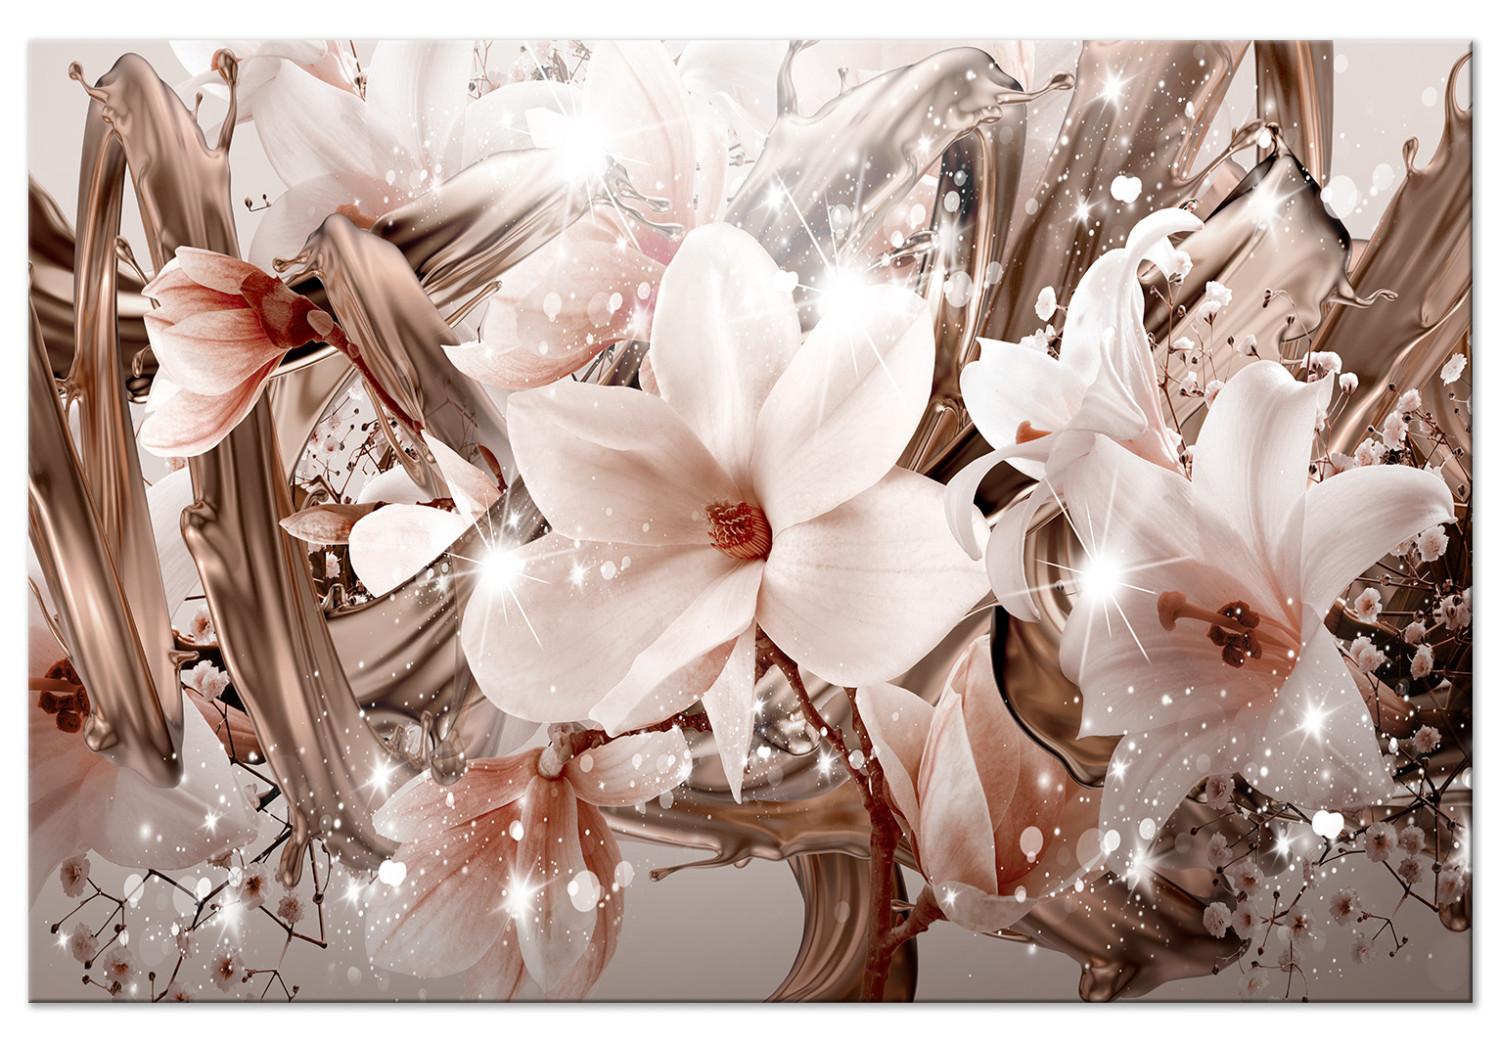 Canvas Flowers and Gold (1-piece) - magnolia and lilies in golden glow